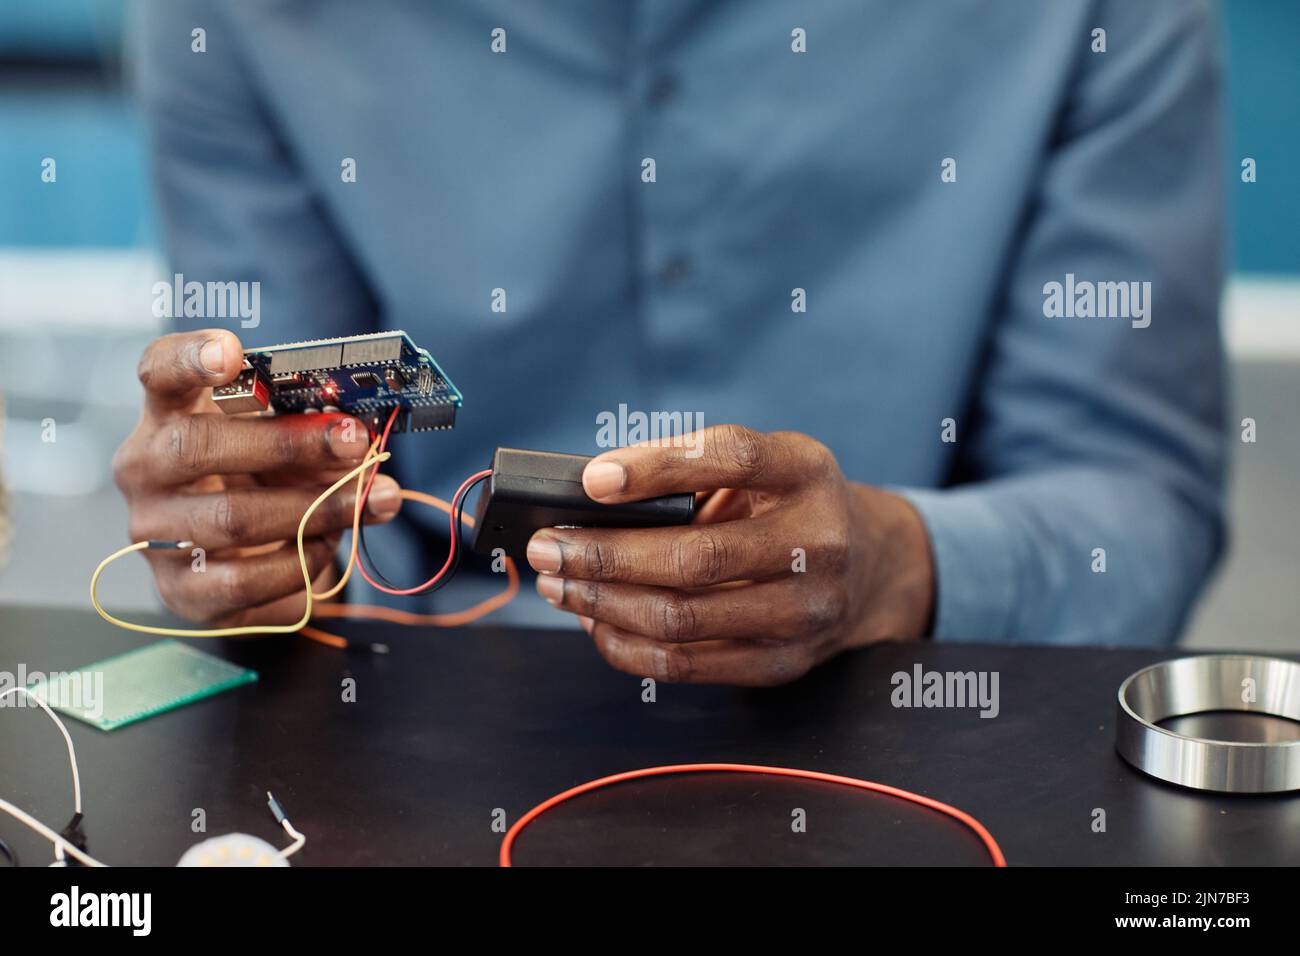 Close up of black young man holding circuit board while building robot, copy space Stock Photo